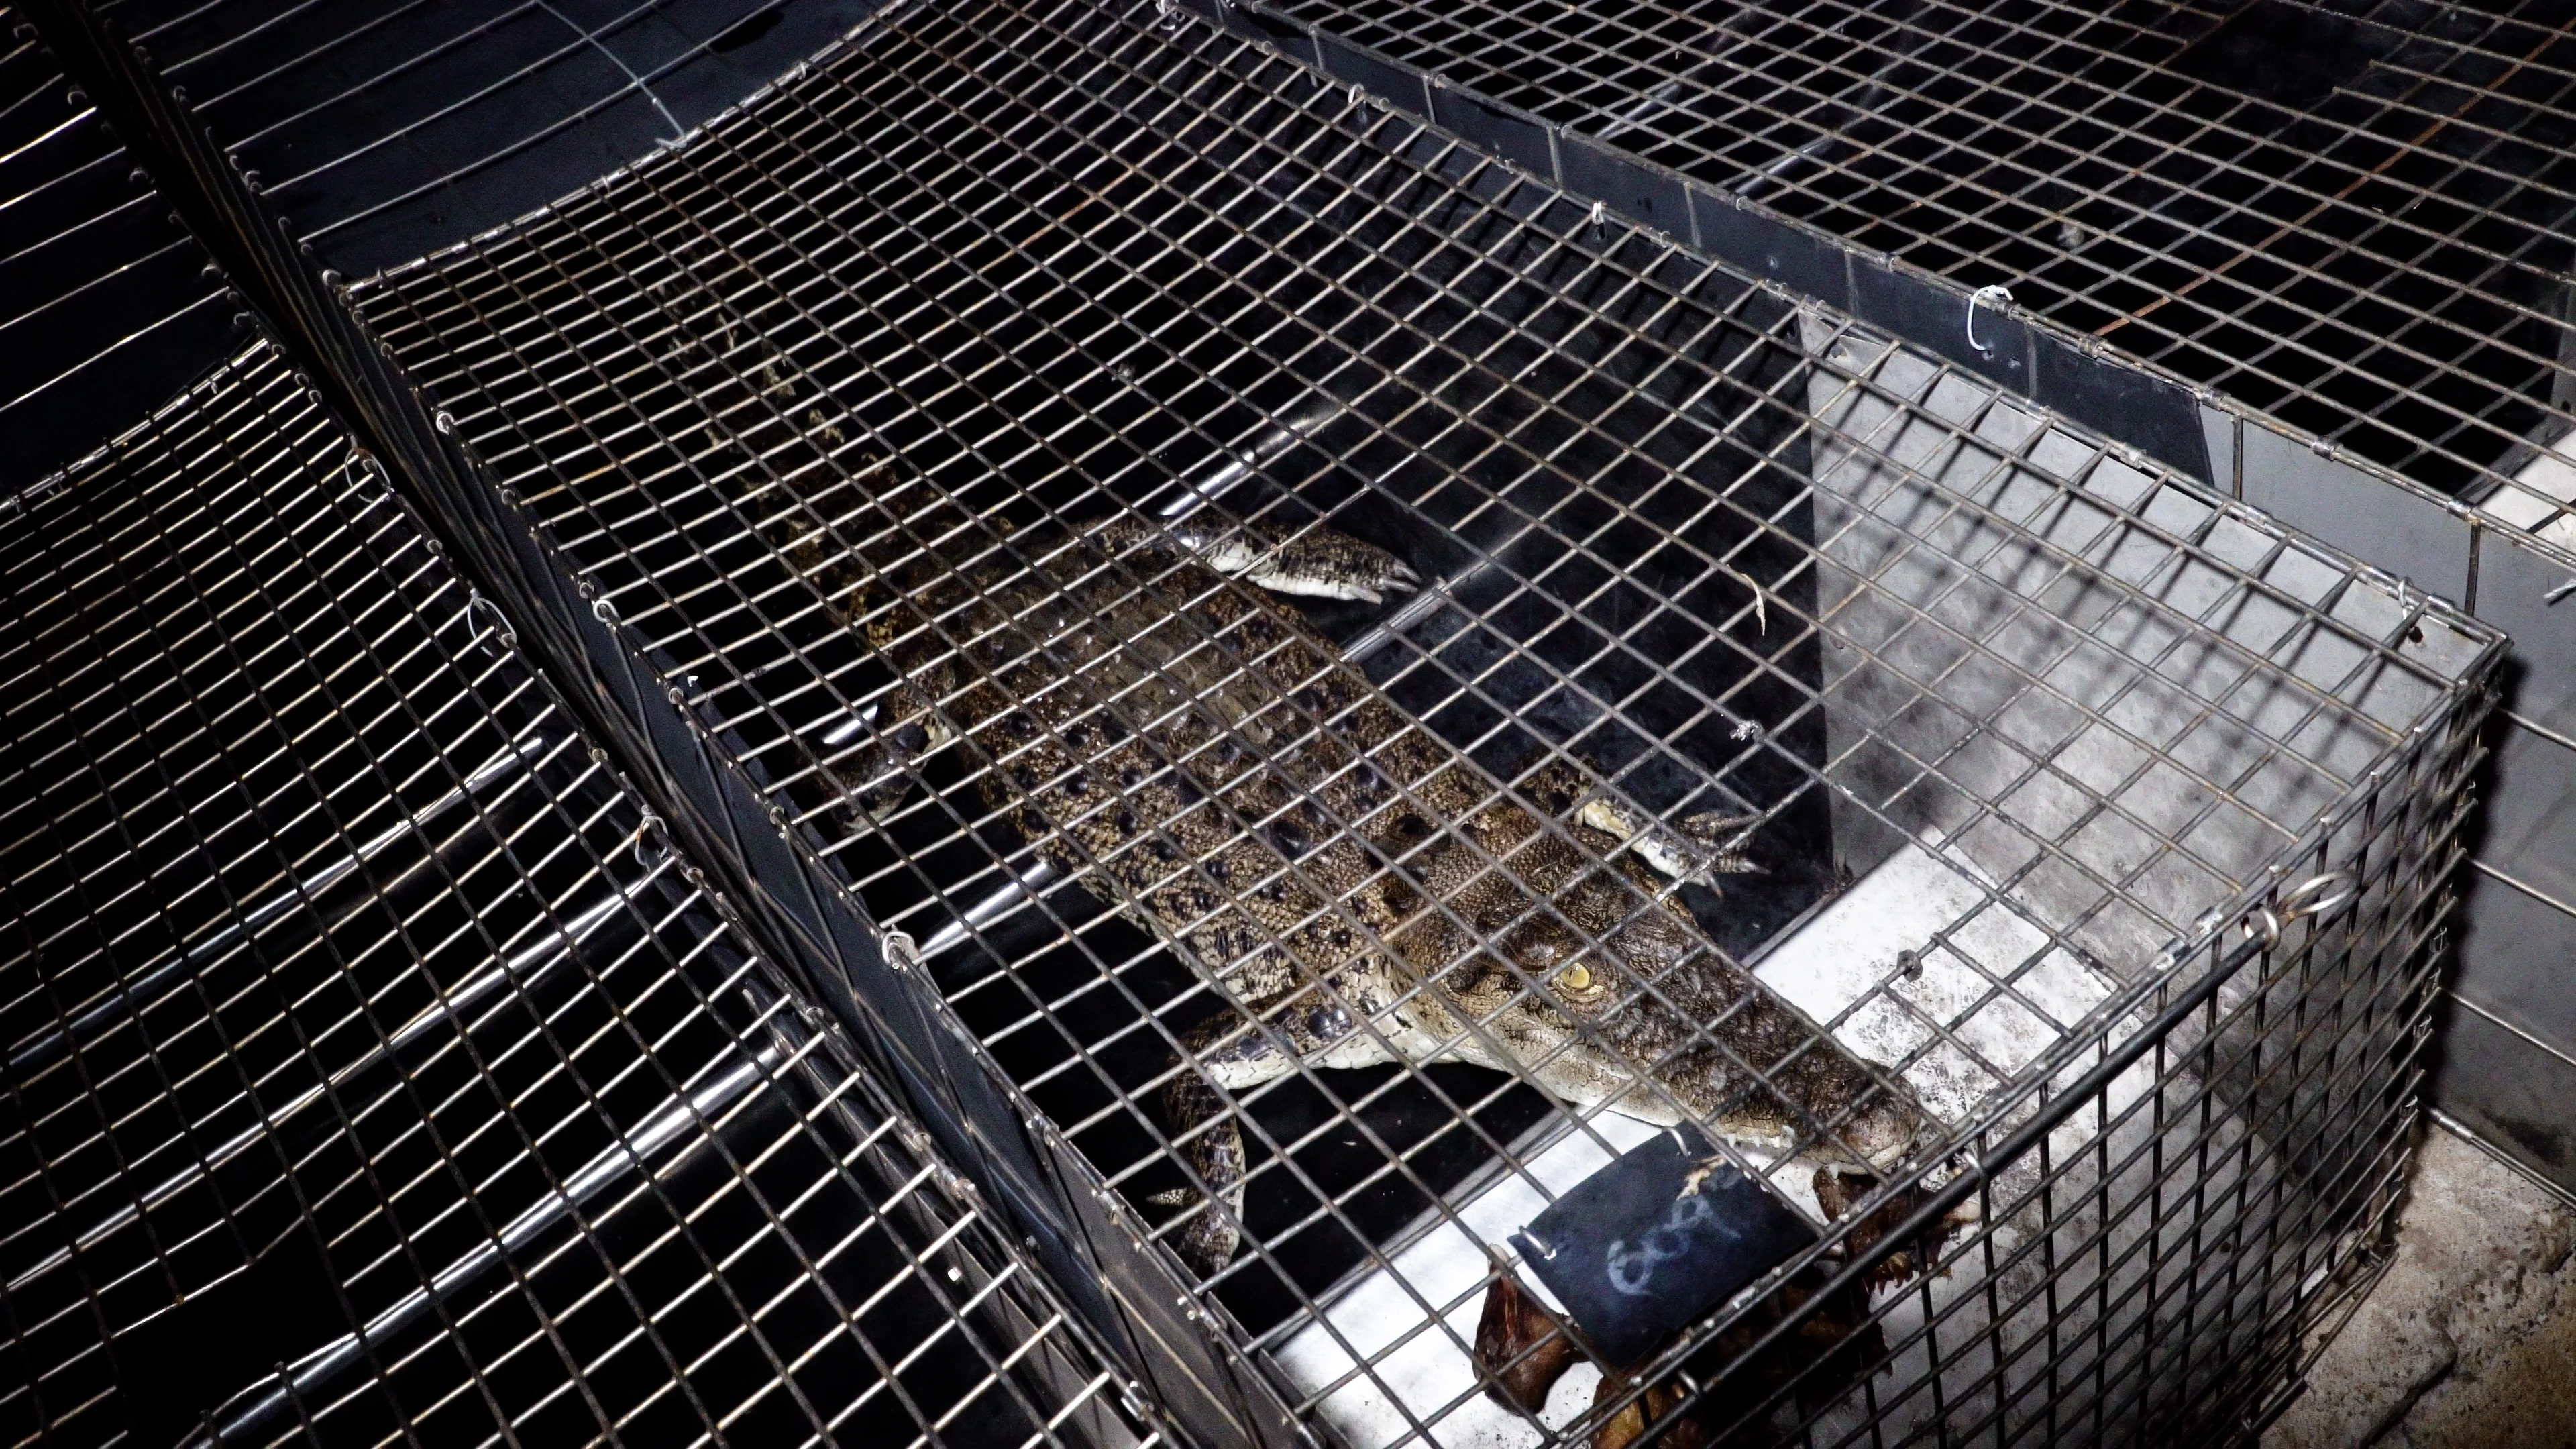 The suffering of crocodiles at leather farms for Hermes bags into exposed  in video